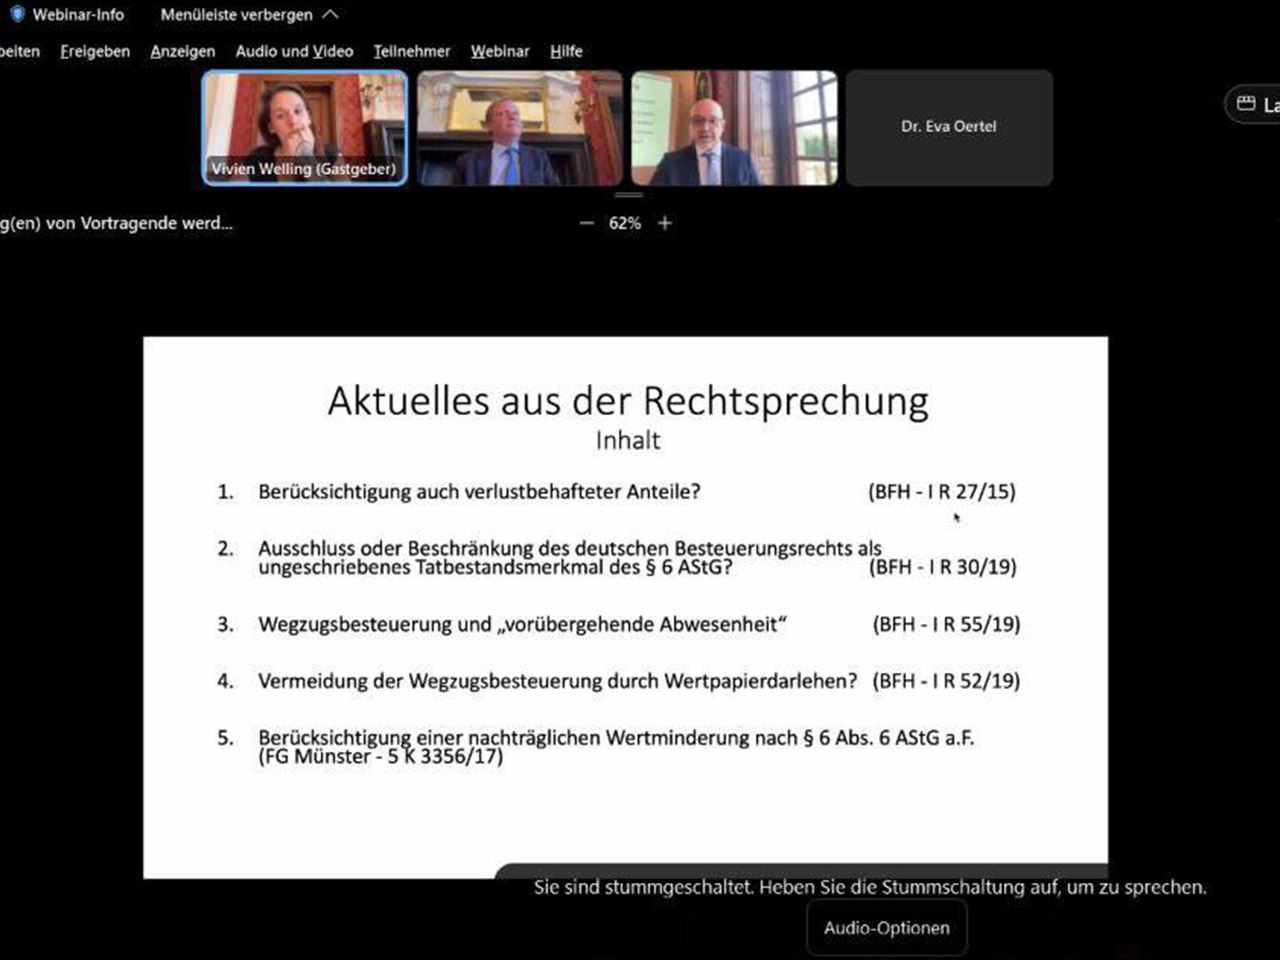  State Tax University joined the online event of the North Rhine-Westphalia University of Finance 